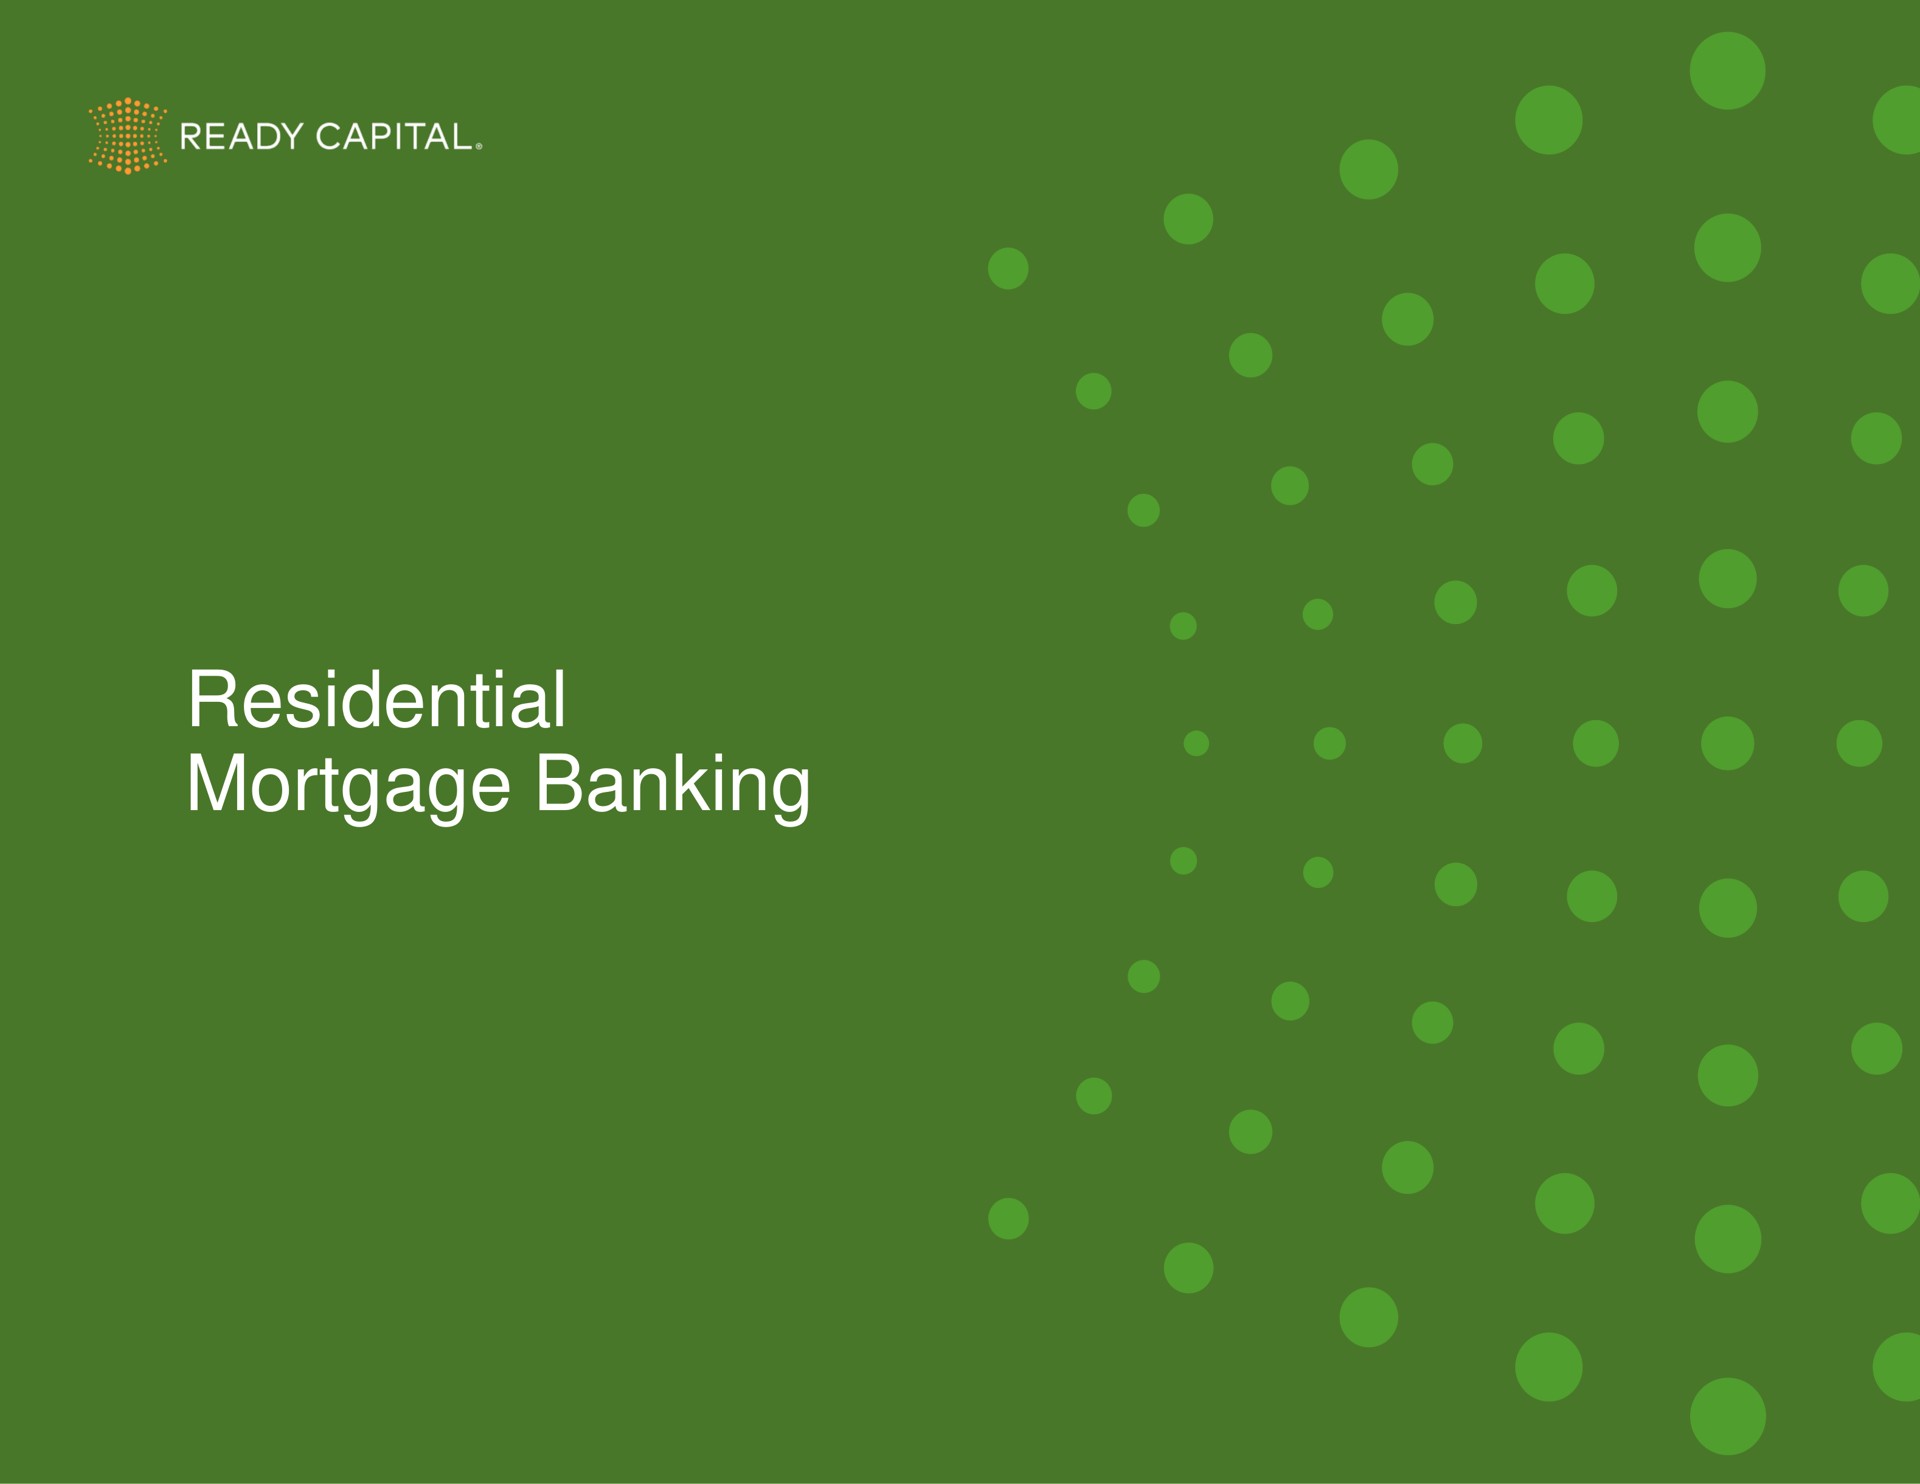 residential mortgage banking ready capital | Ready Capital